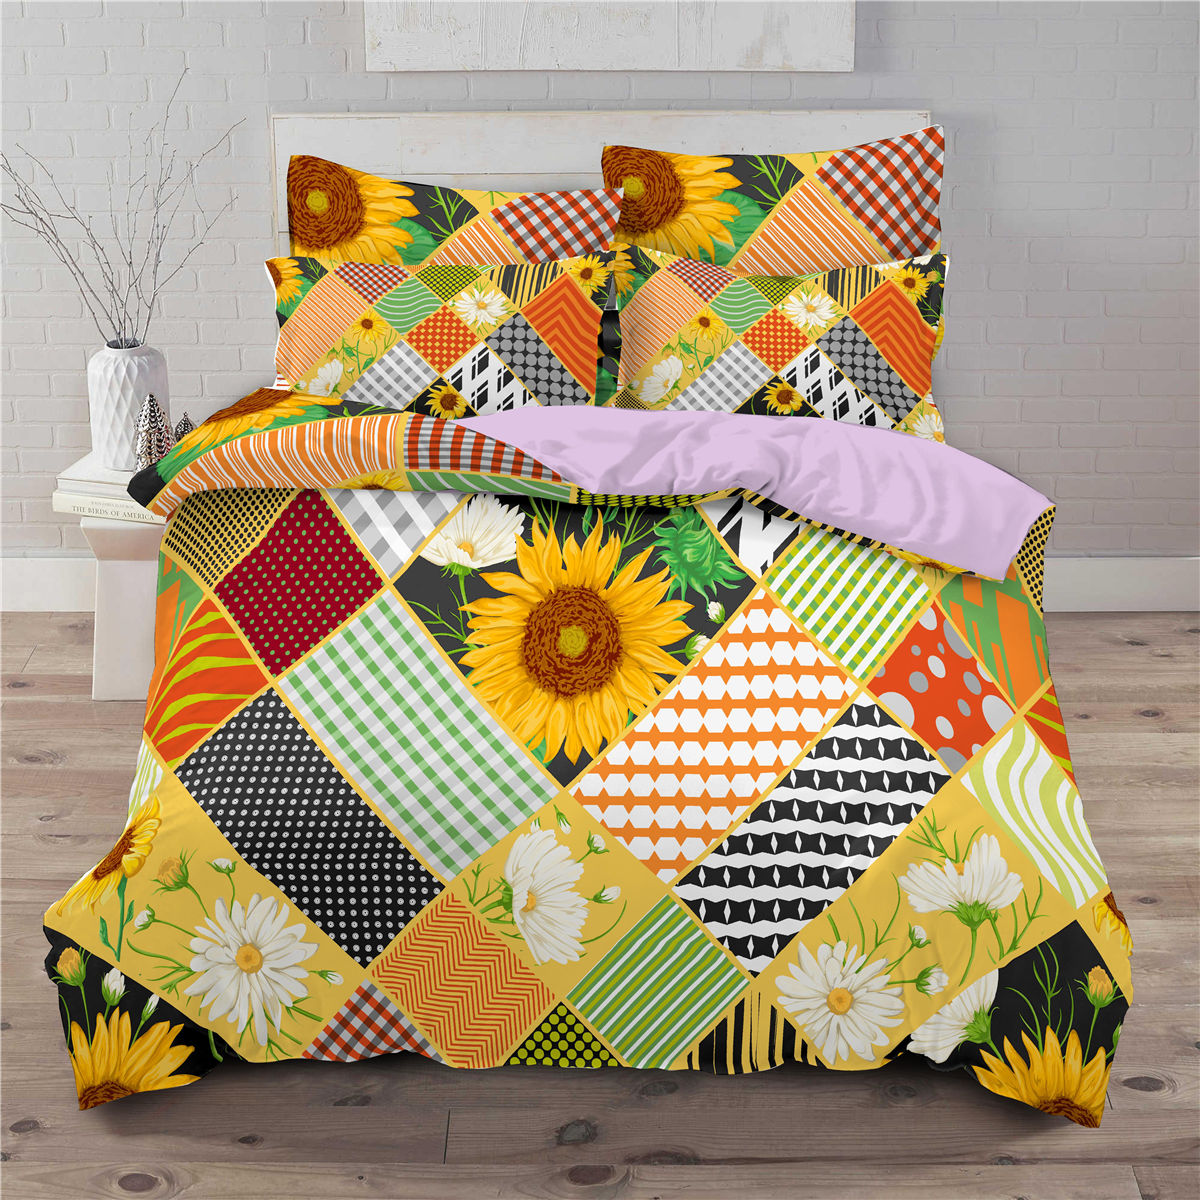 3 piece bedding set with sunflower pattern 3D digital printing quilt set - TRIPLE AAA Fashion Collection